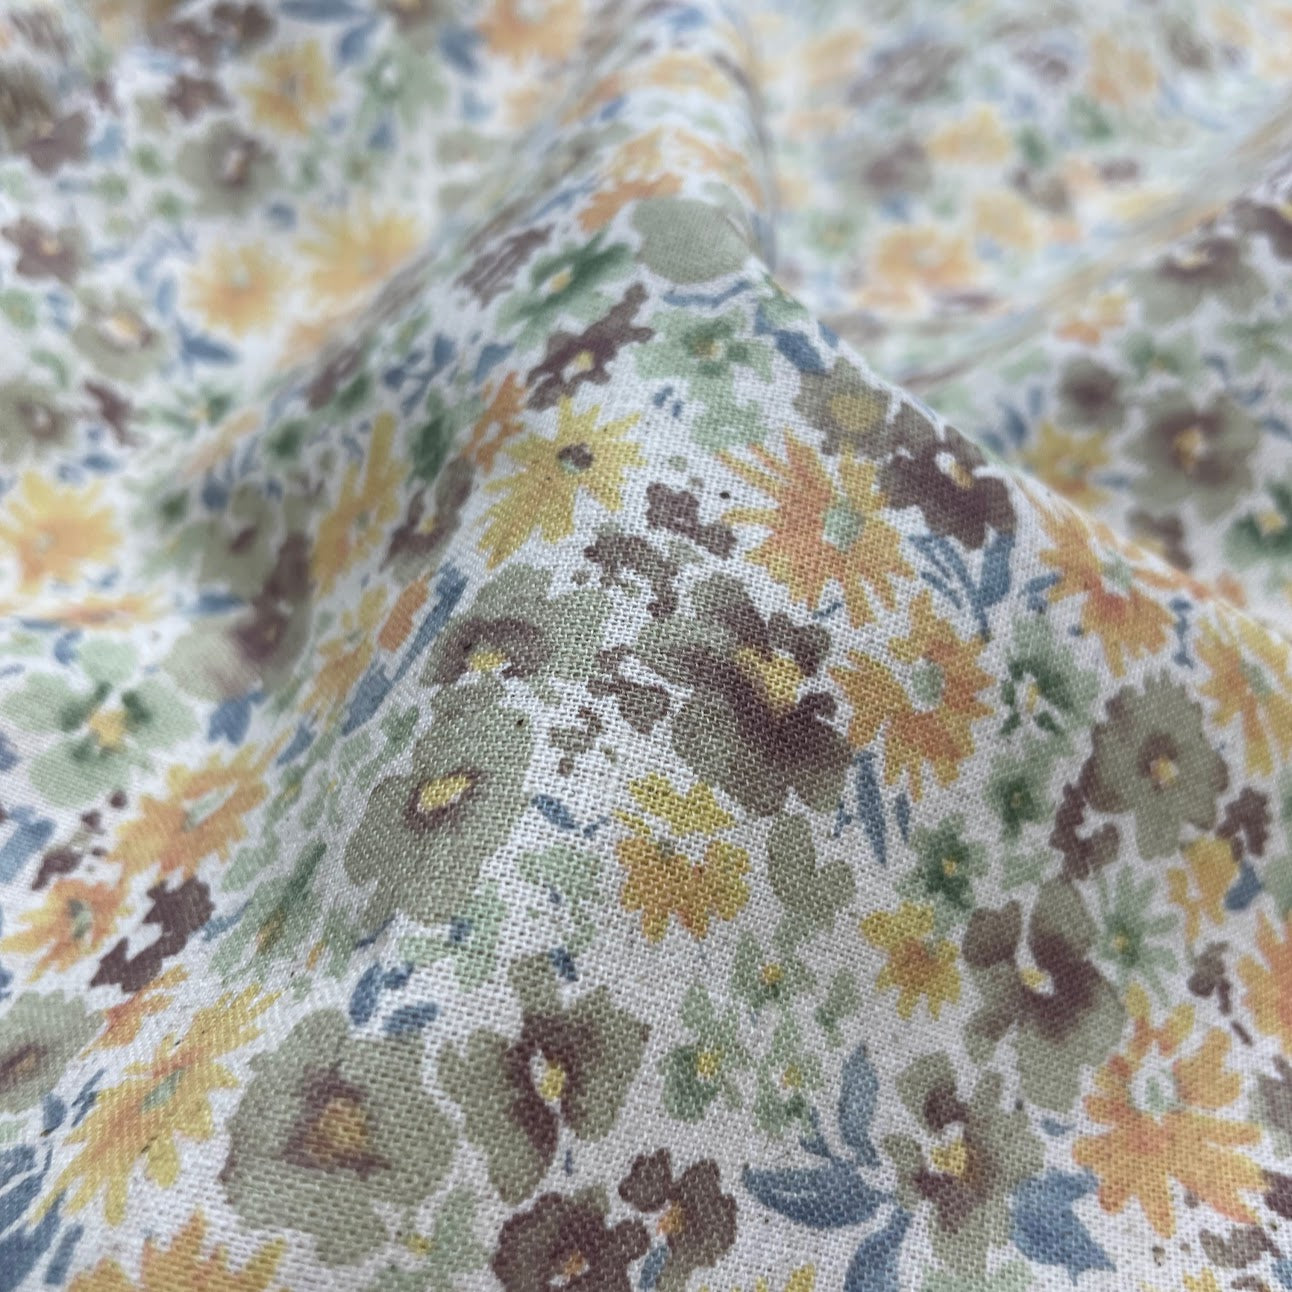 Watercolor Flowers - Fall - Cotton Linen Fabric